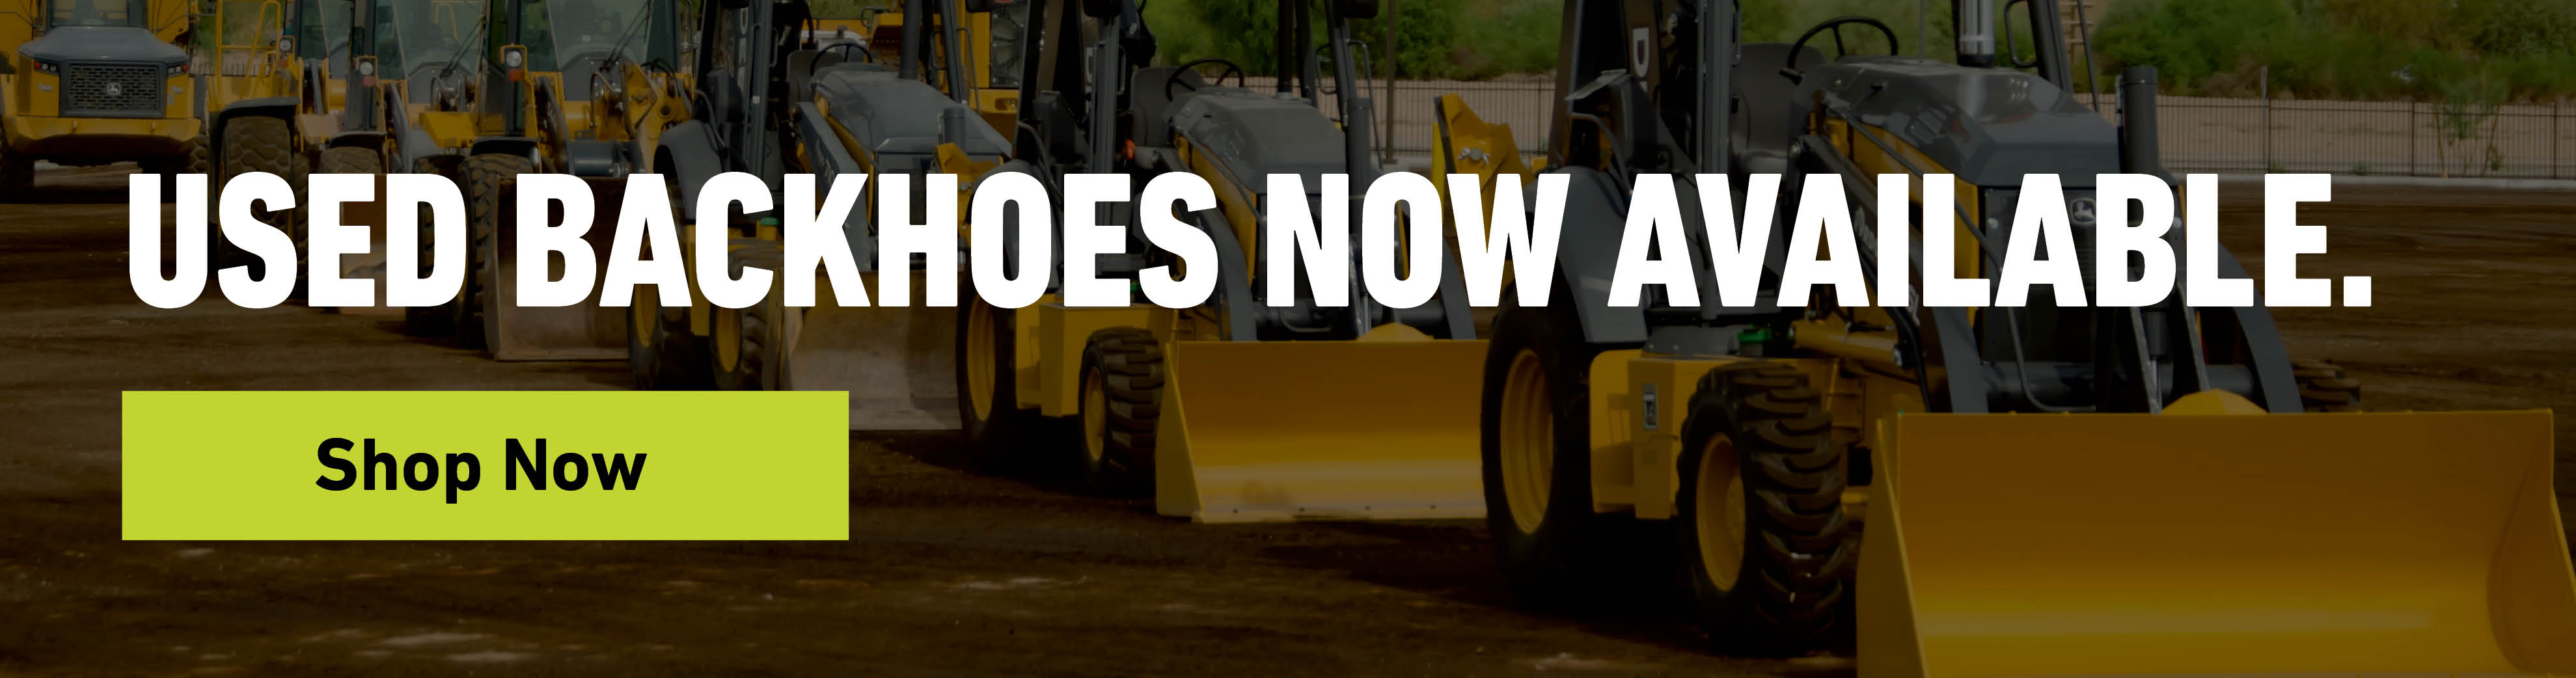 Used Backhoes Now Available 